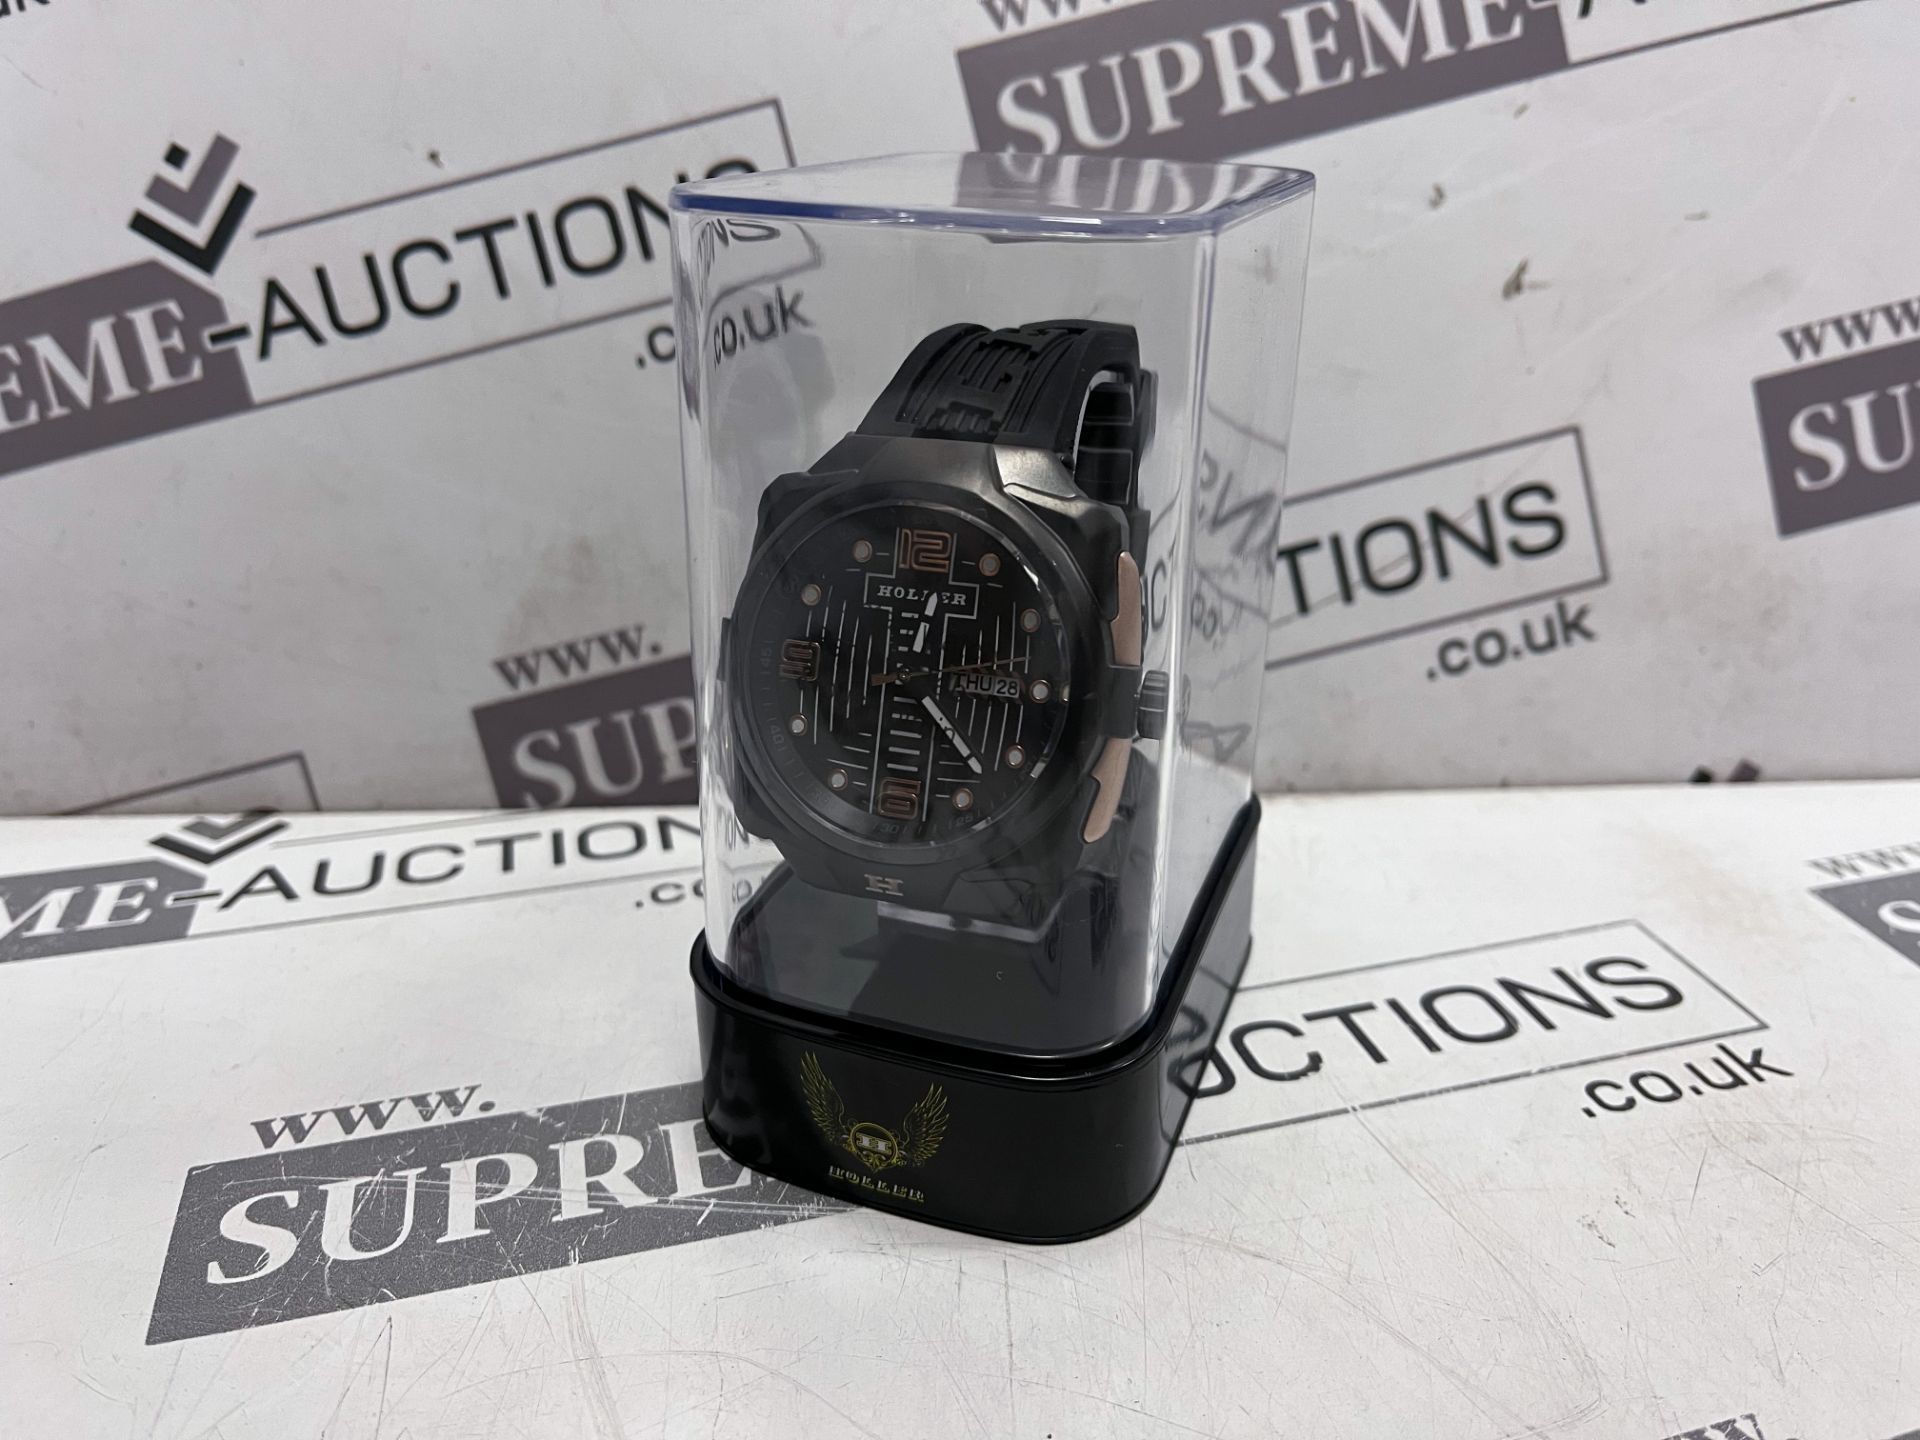 BRAND NEW HOLLER IMPACT BLACK AND HIGHLIGHTS GENTS FASHION WATCH RRP £229 OFC